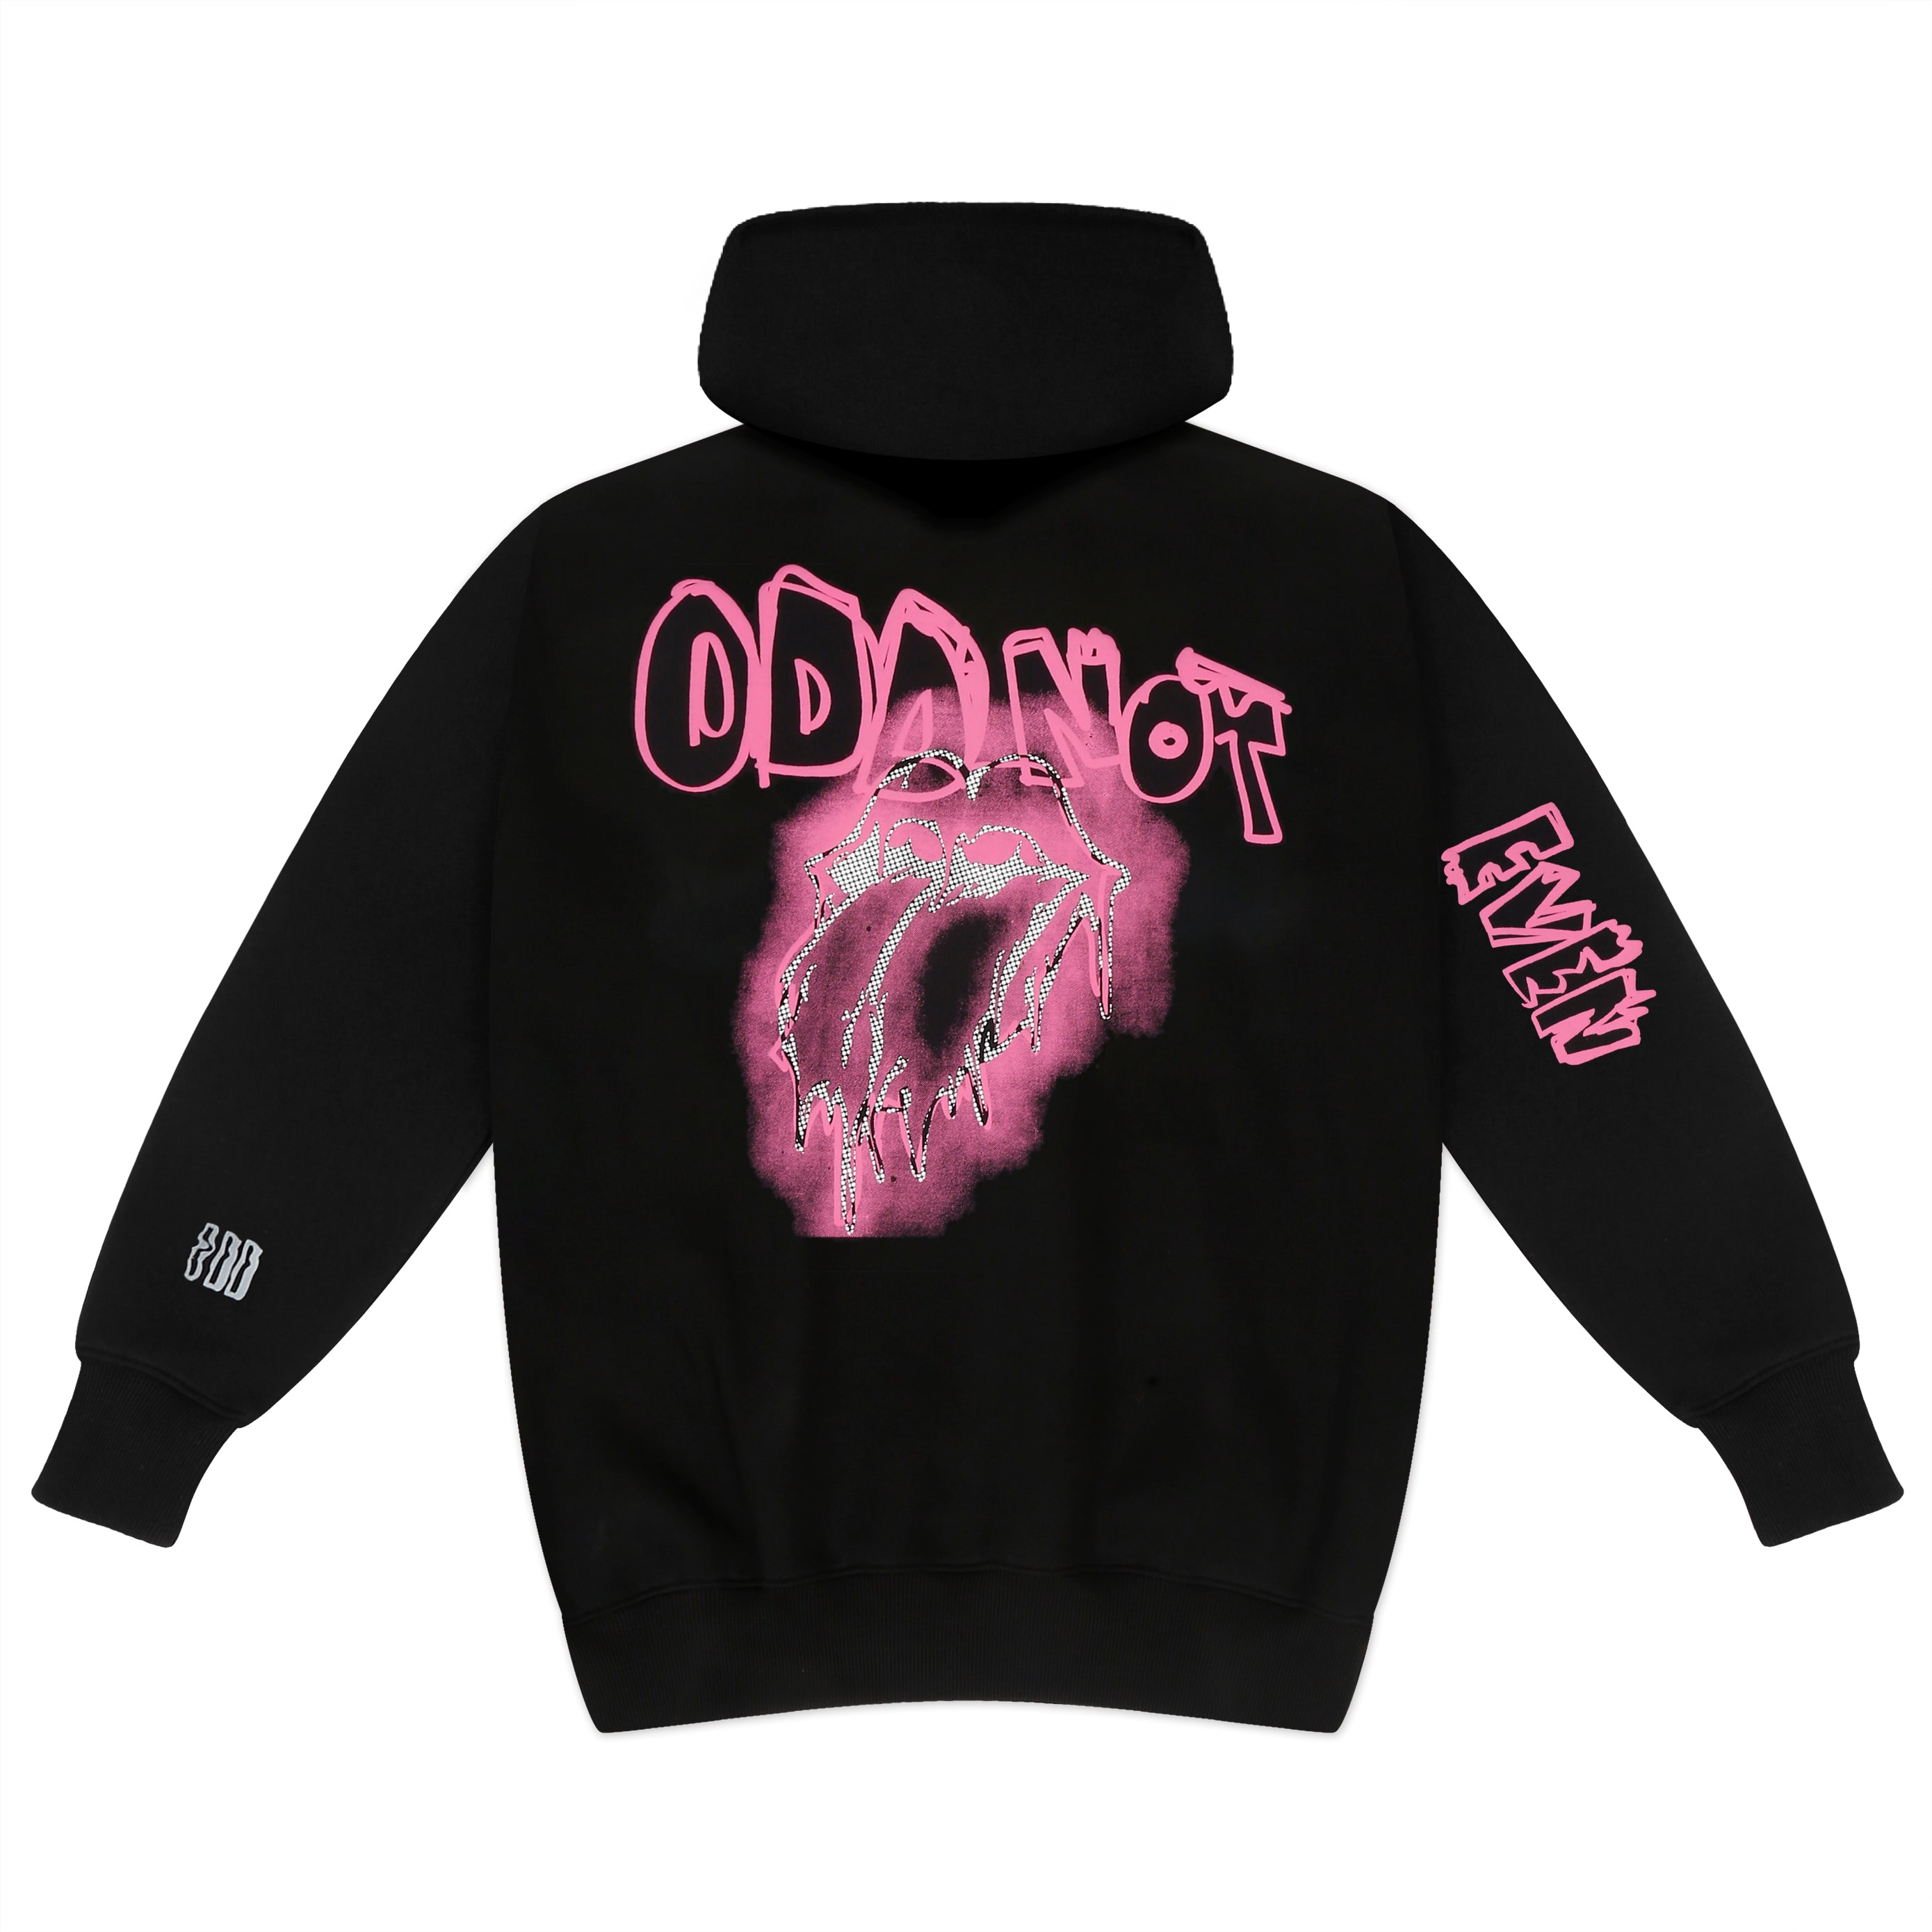 Odd & Delicious Oversized Hoodie